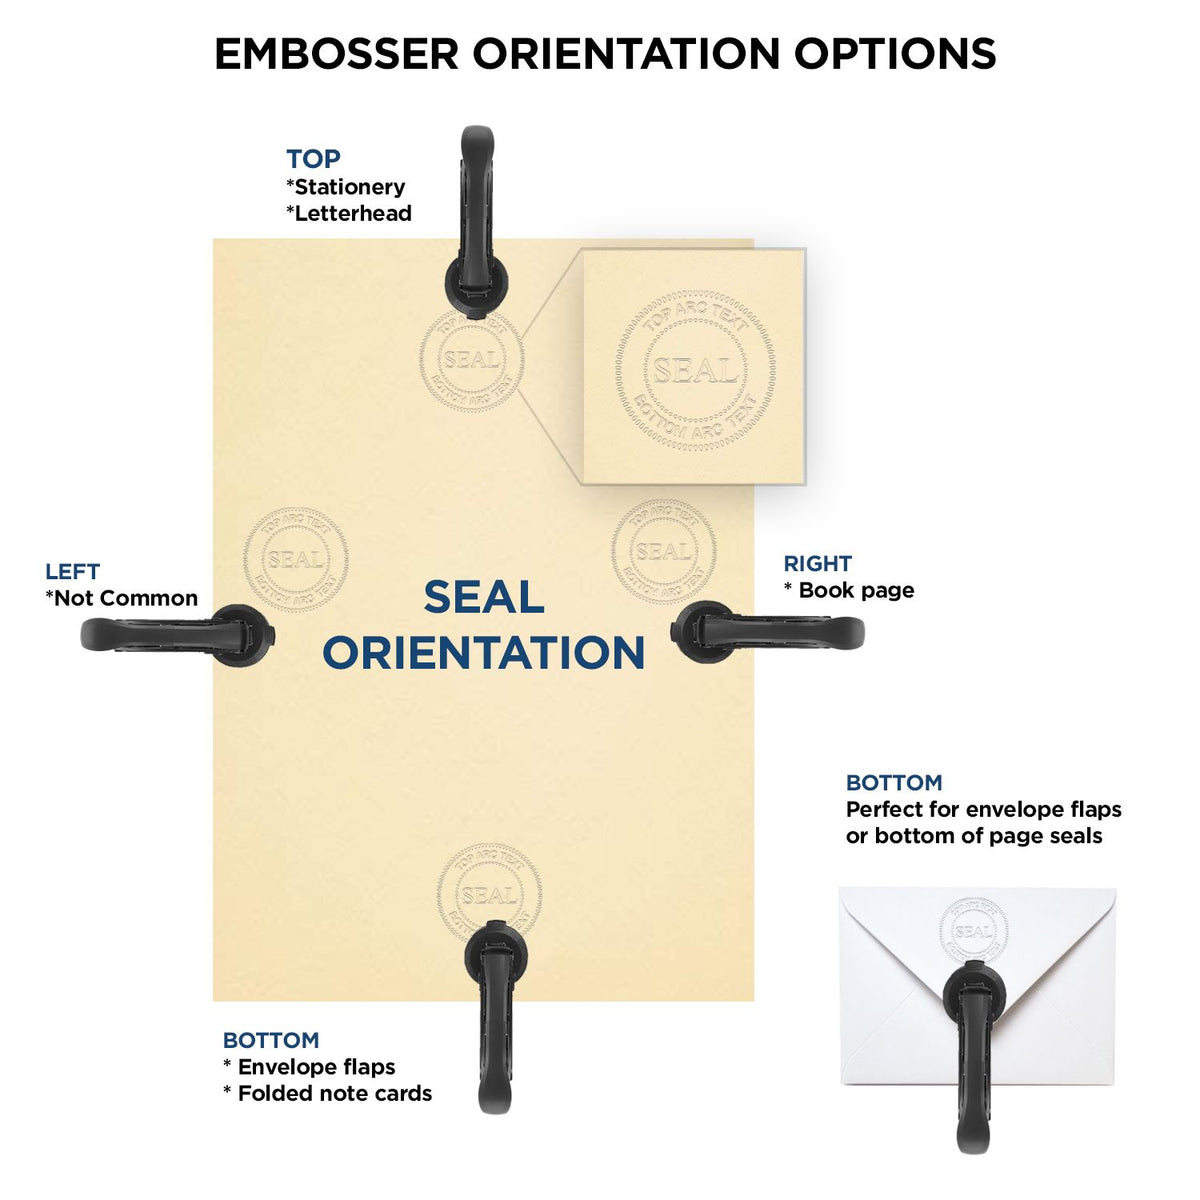 An infographic for the Hybrid South Dakota Engineer Seal showing embosser orientation, this is showing examples of a top, bottom, right and left insert.